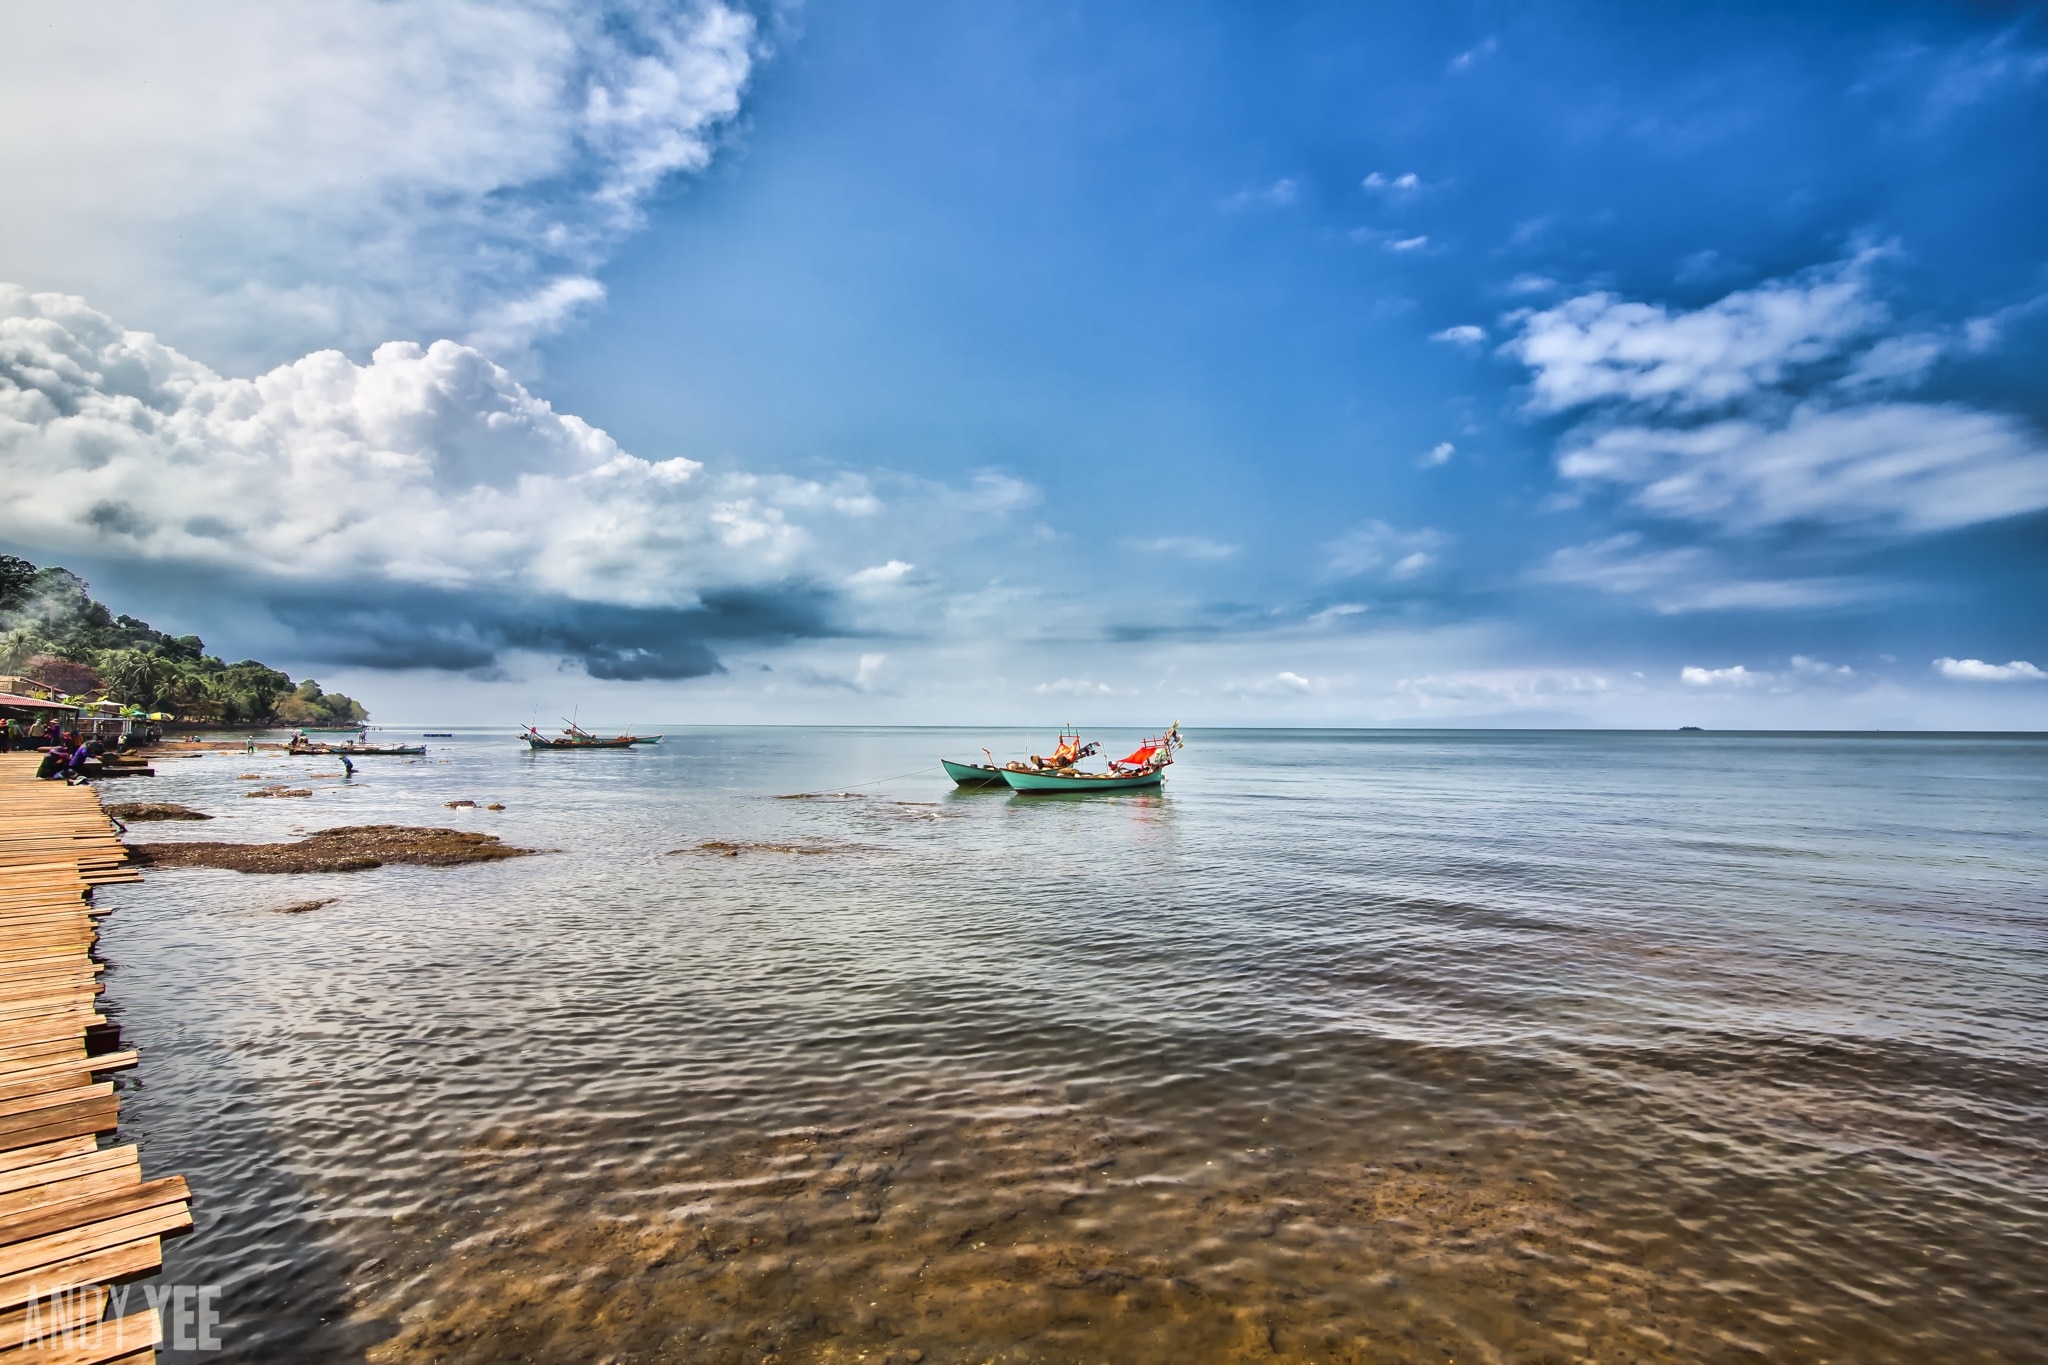 A short scooter trip from Kampot is the small seaside village of Kep. The crab market is the place you should head to pick the fresh crab you want for dinner and possibly go with the infamous local style of cooking it with Kampot pepper, one of the best peppers in the world.

#localgem #TroveOn #kep #cambodia #travelphotography #traveltips